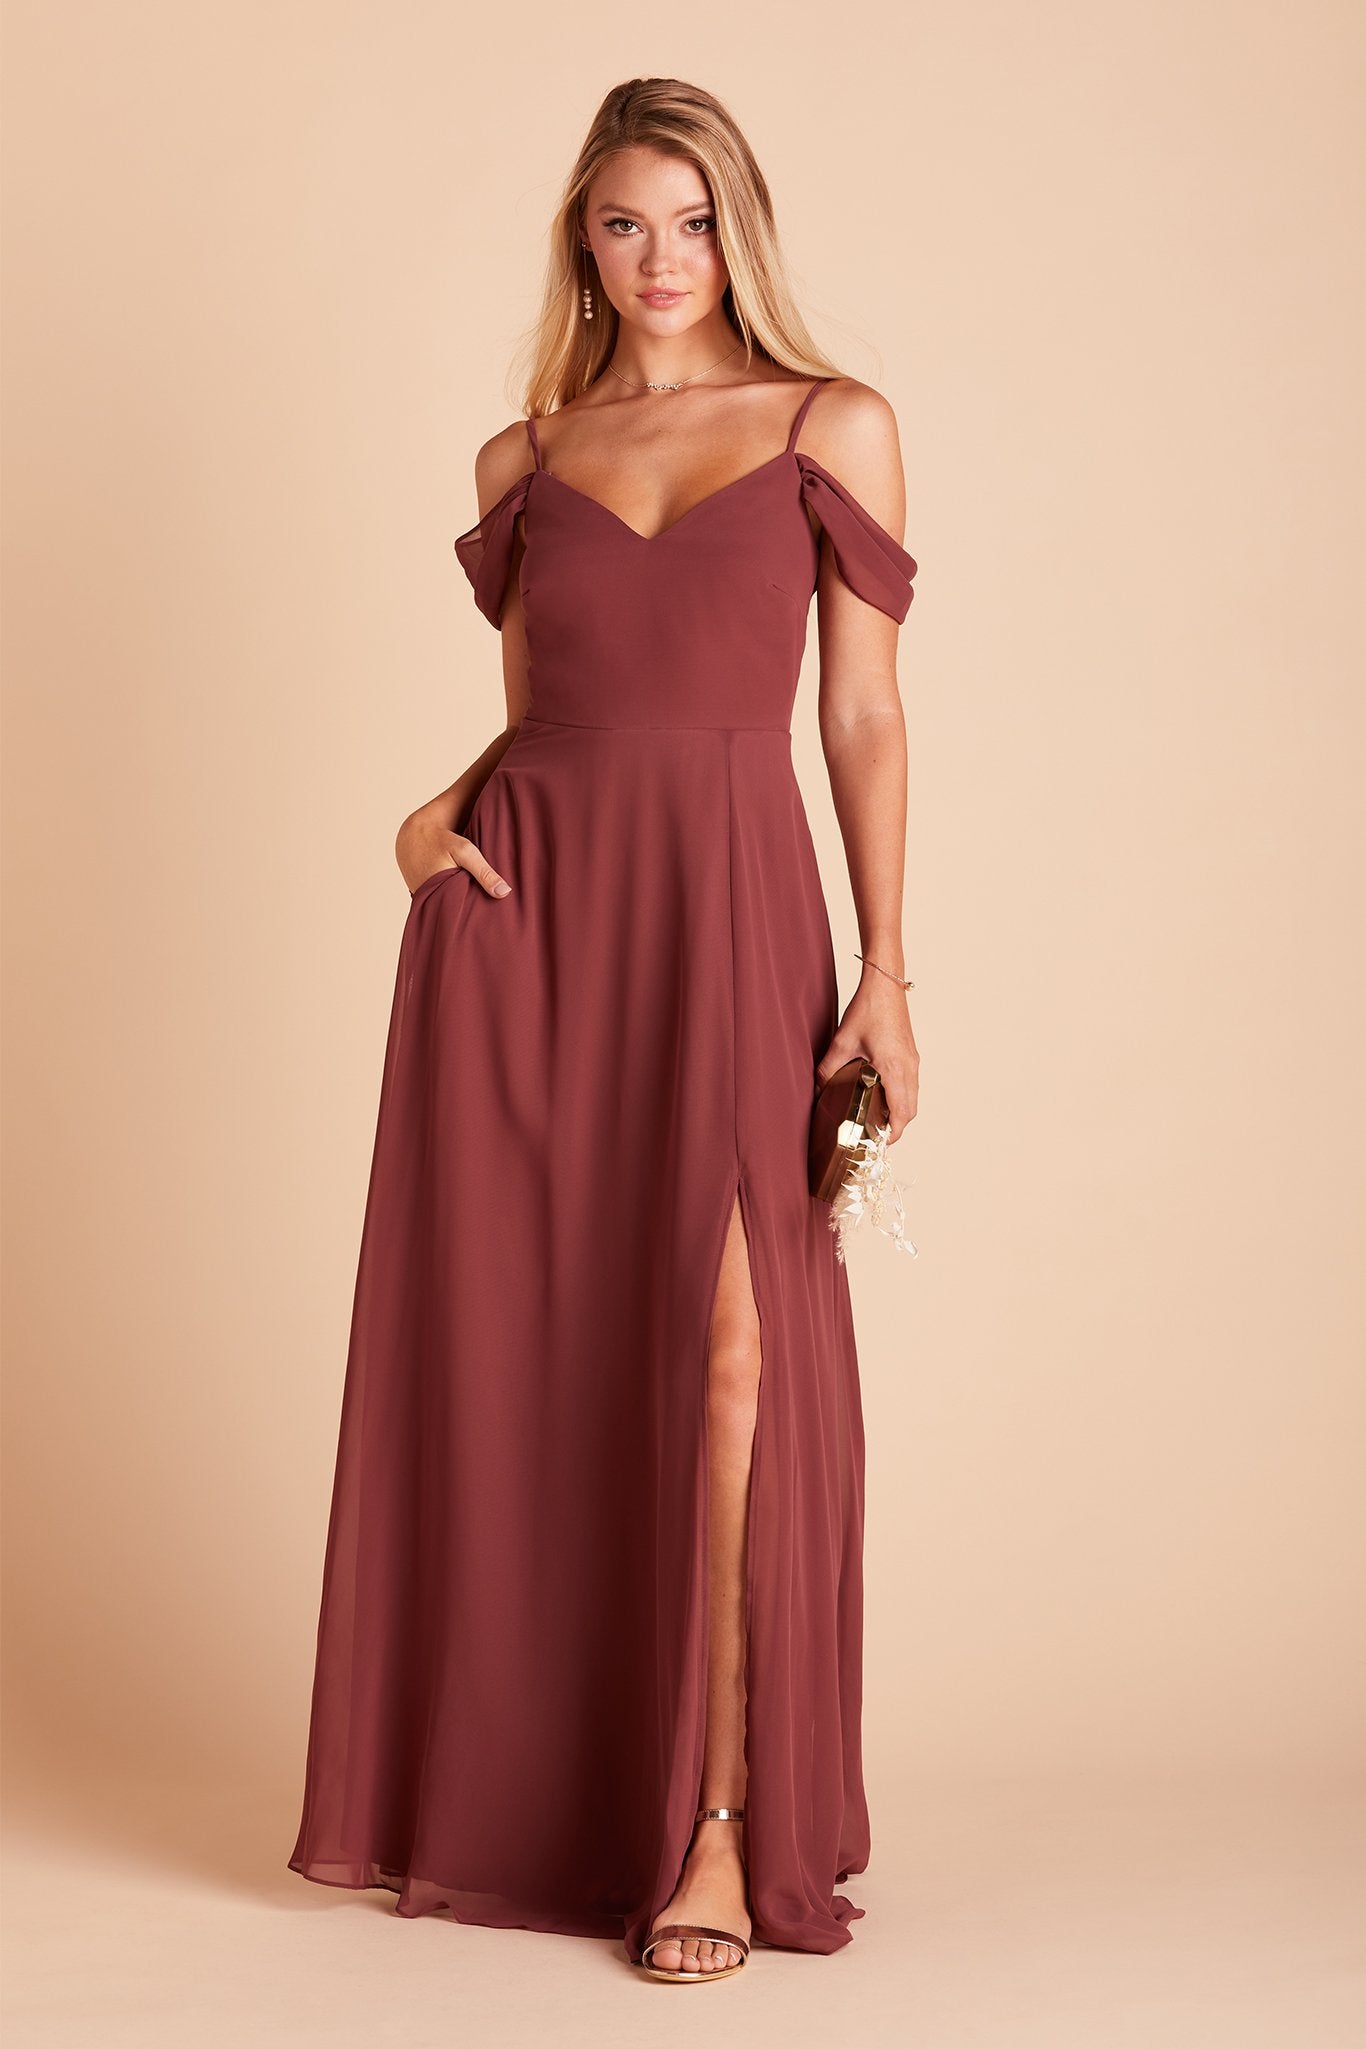 Devin convertible bridesmaids dress with slit in rosewood chiffon by Birdy Grey, front view with hand in pocket